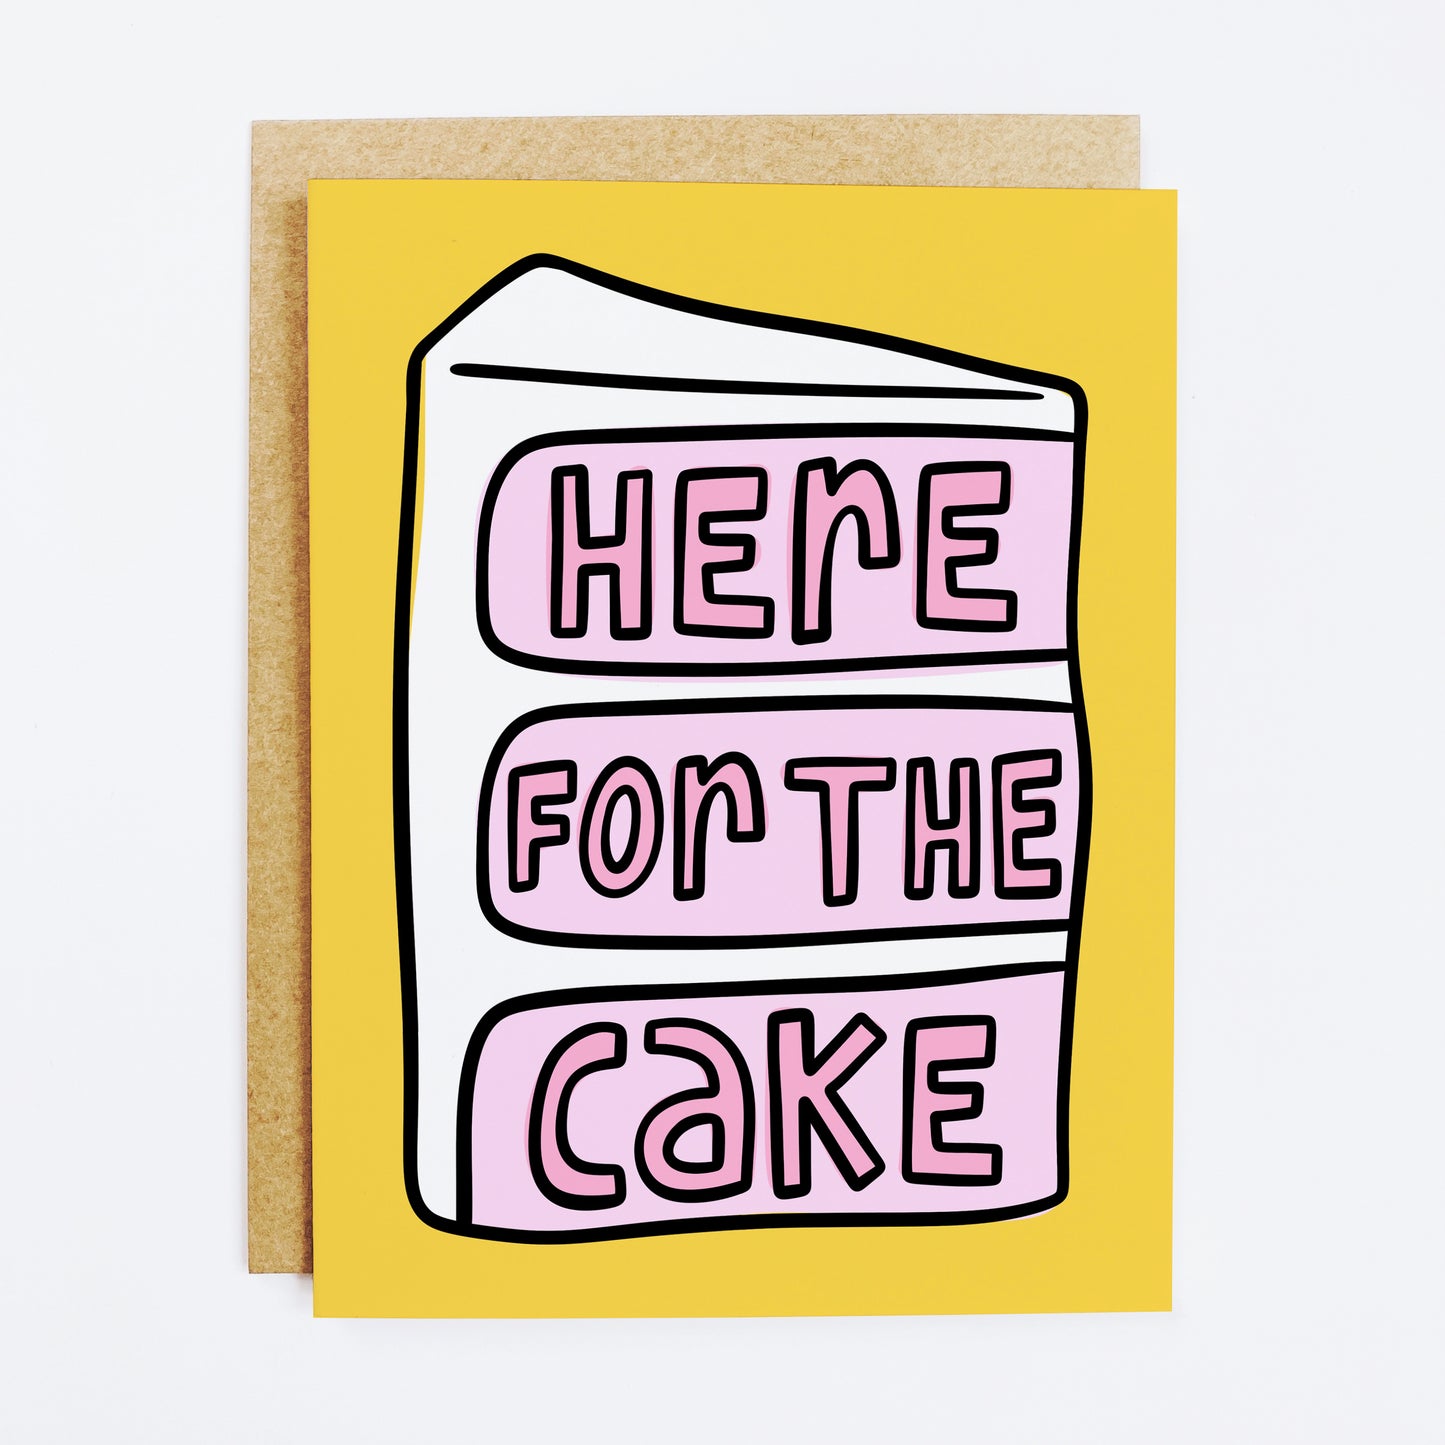 Here For The Cake Birthday Card